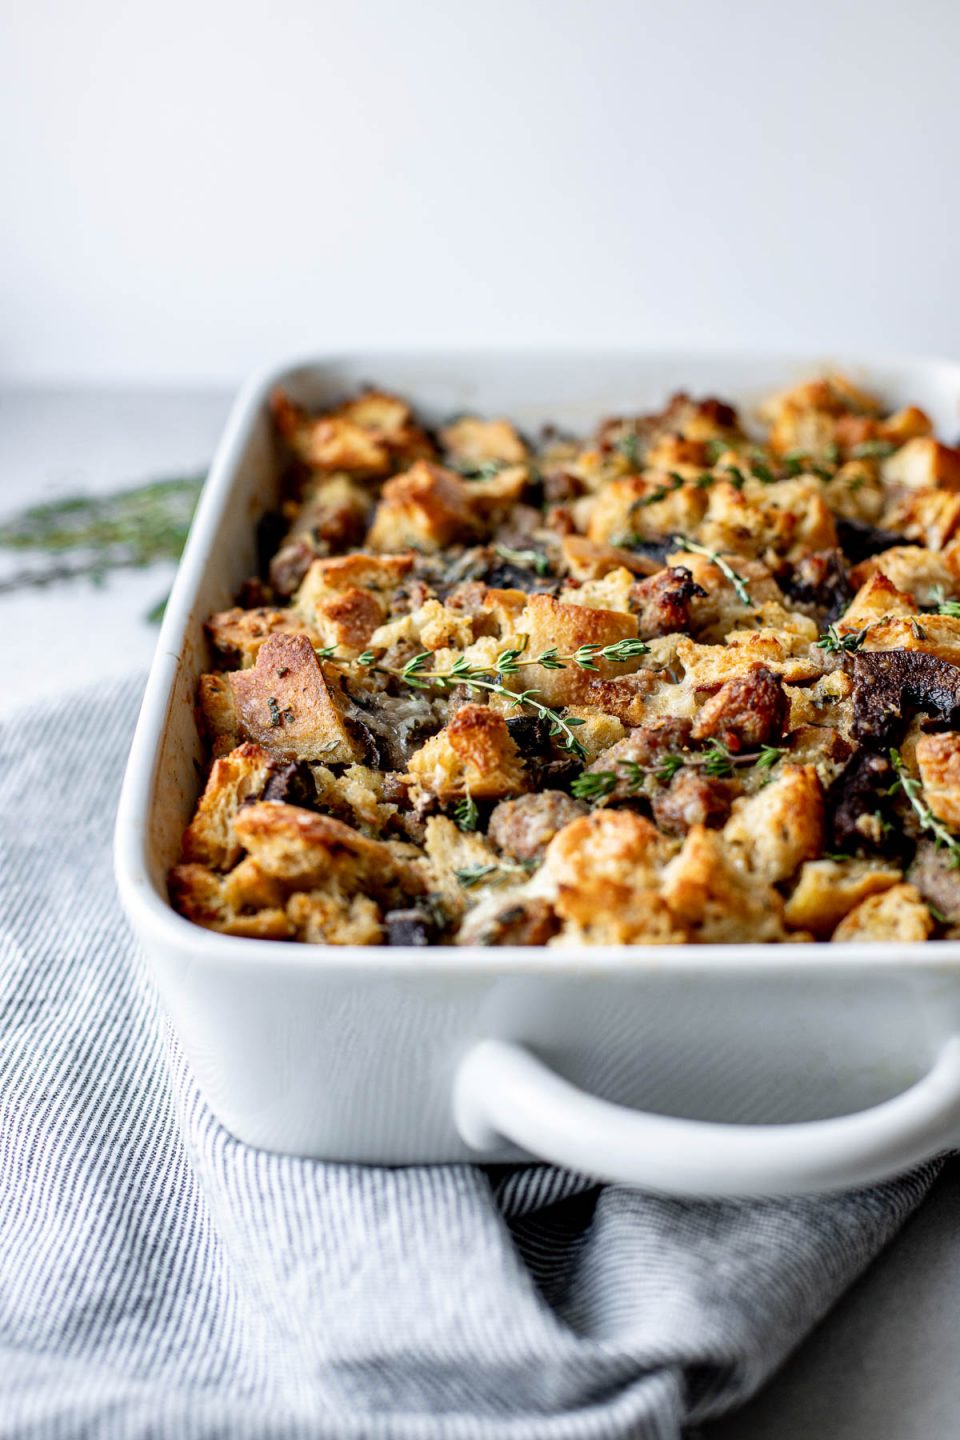 A side angle shot of baked sourdough stuffing with sausage and mushrooms in a white baking dish rests atop a light textured surface ​surrounded by a gray and white striped linen napkin and fresh herbs